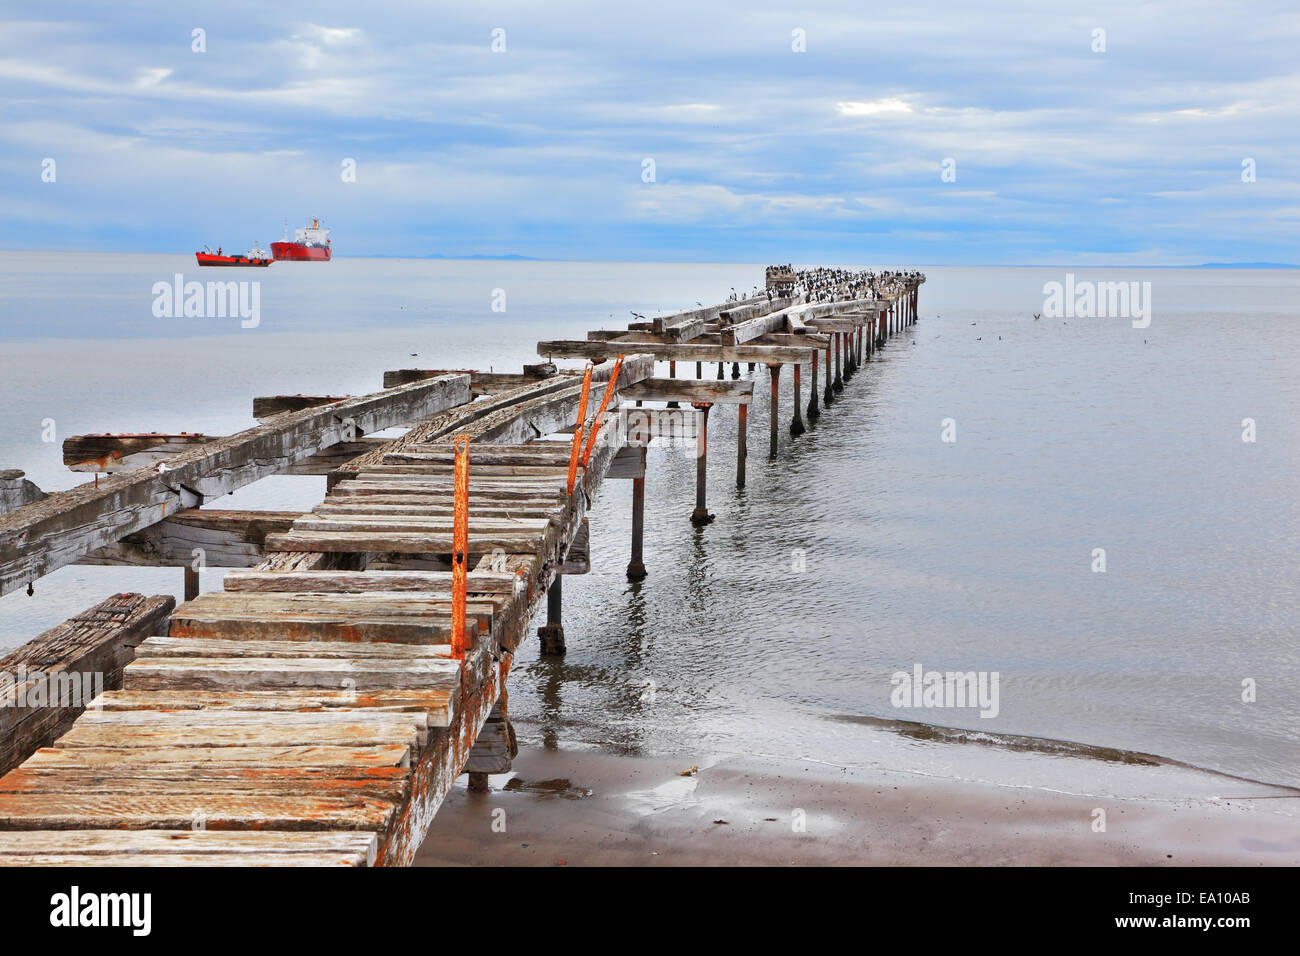 Old dilapidated pier Stock Photo